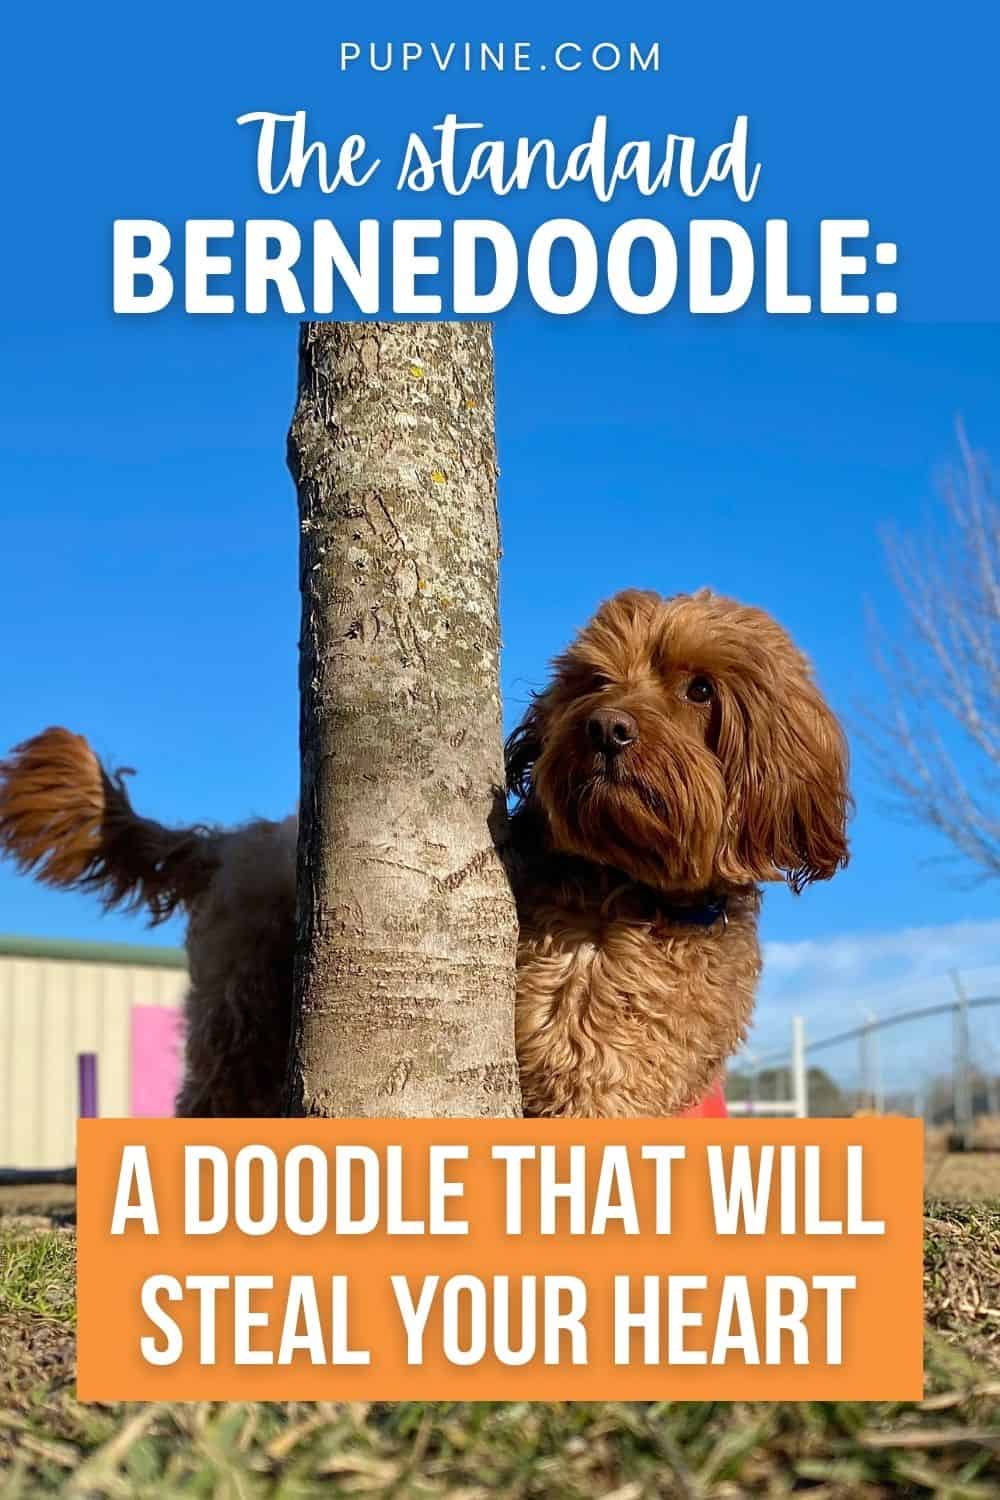 The Standard Bernedoodle A Doodle That Will Steal Your Heart